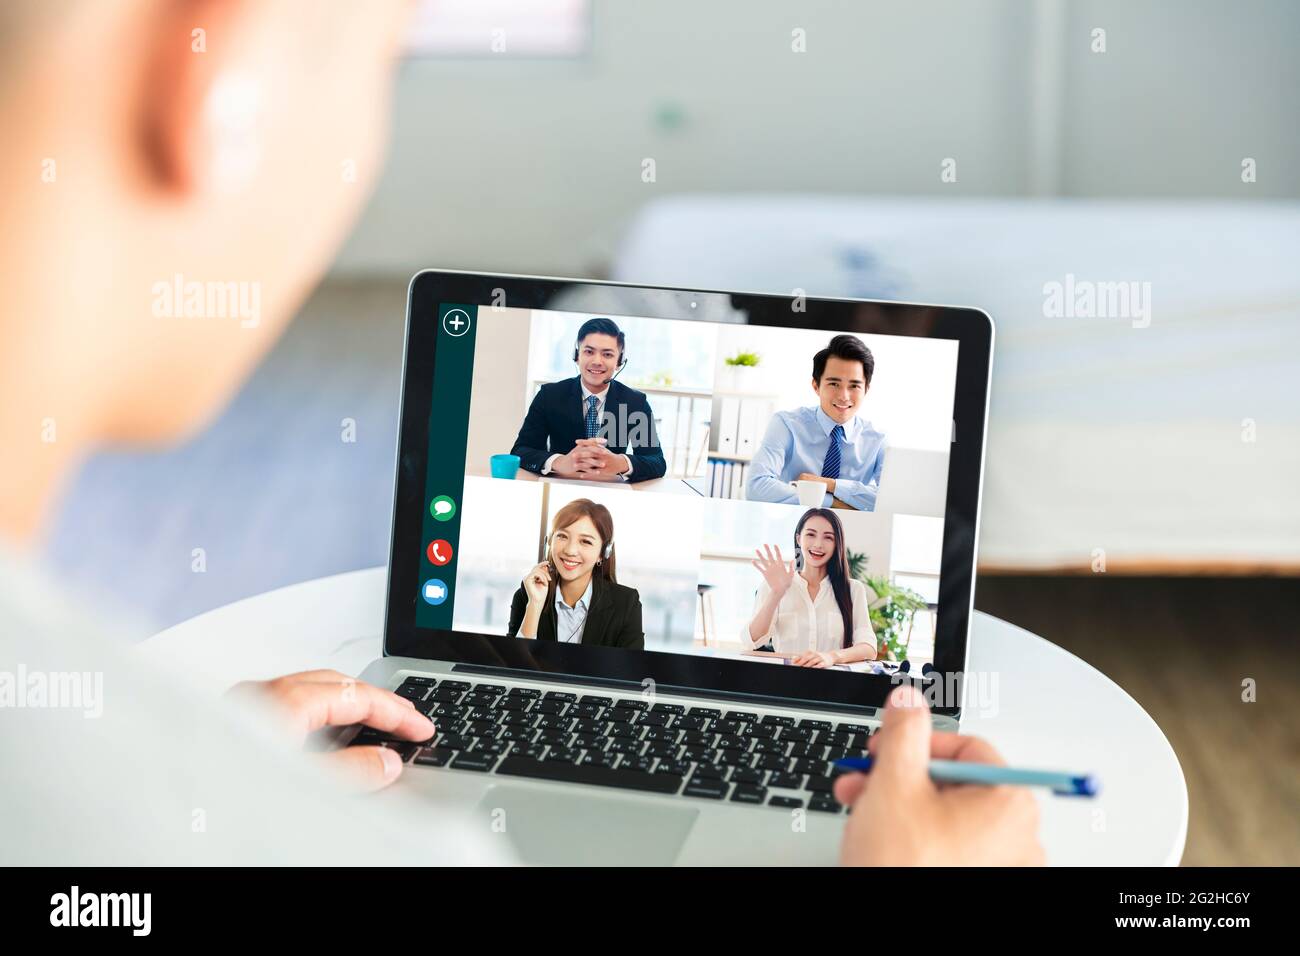 Business people use laptops for web meetings at home, discuss work and schedules with colleagues through webcams Stock Photo